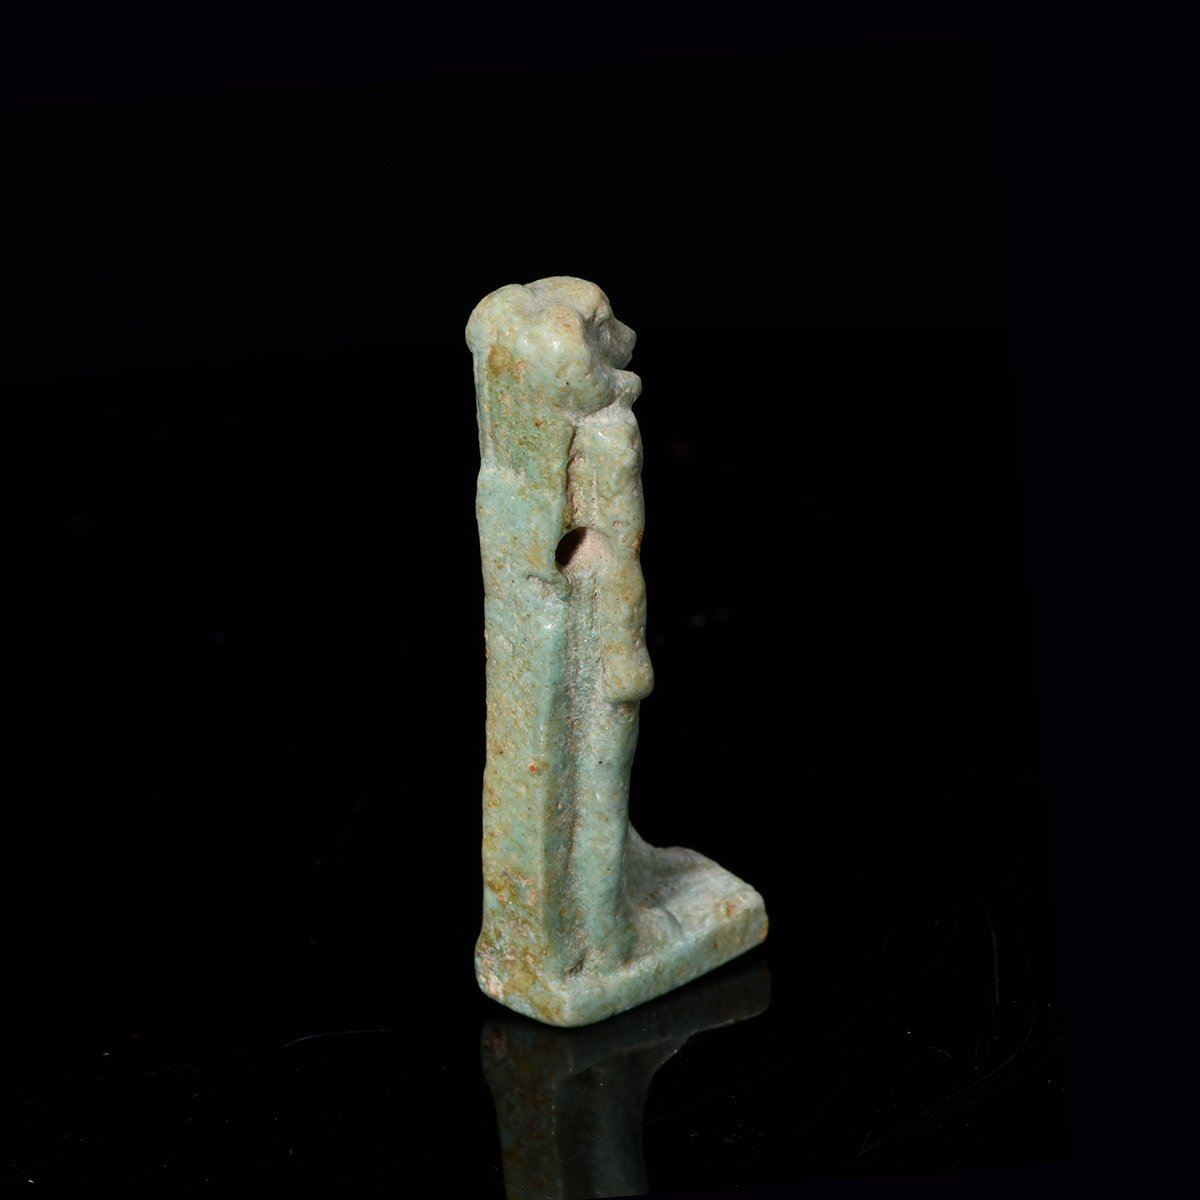 An Egyptian Faience Amulet of Khnum, Late Period, ca 664 - 332 BCE